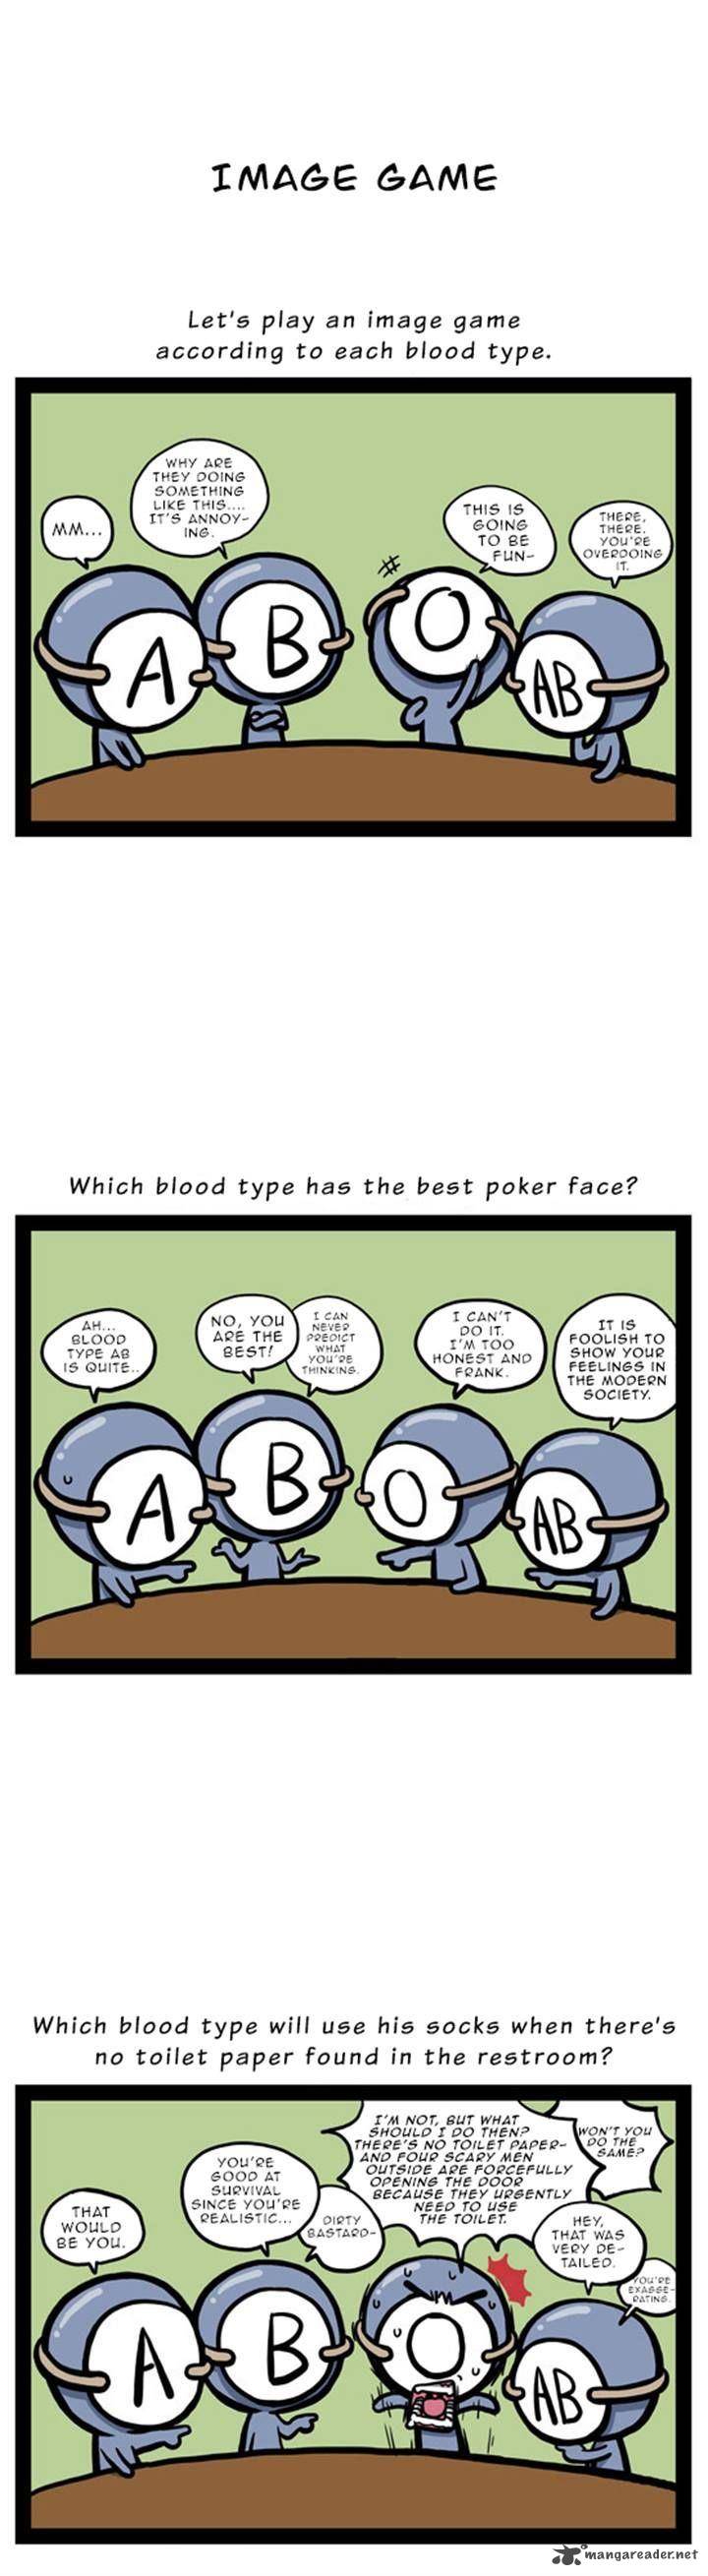 A Simple Thinking About Blood Types 15 2